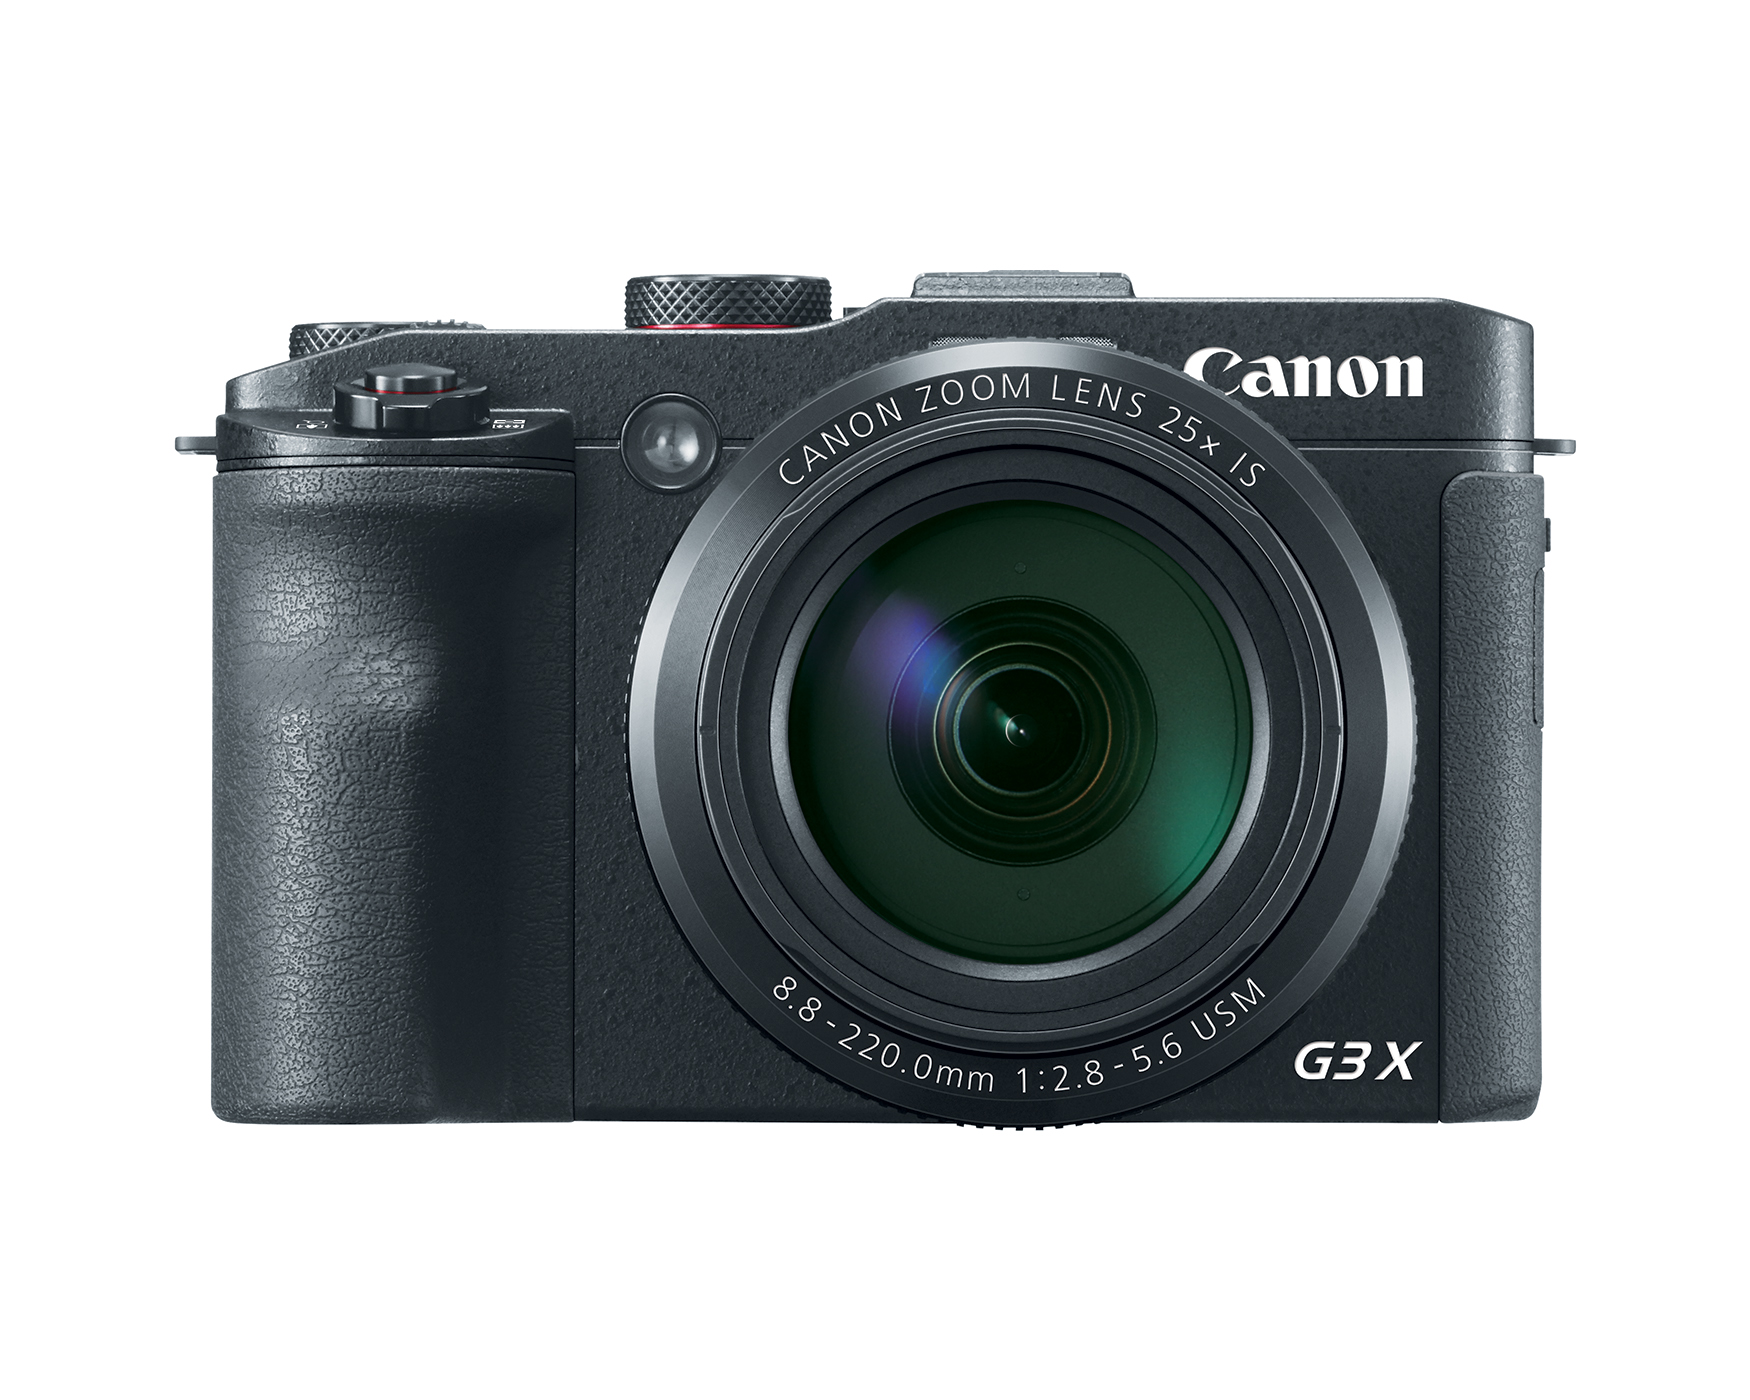 The Canon G3 X Can Zoom to 600mm